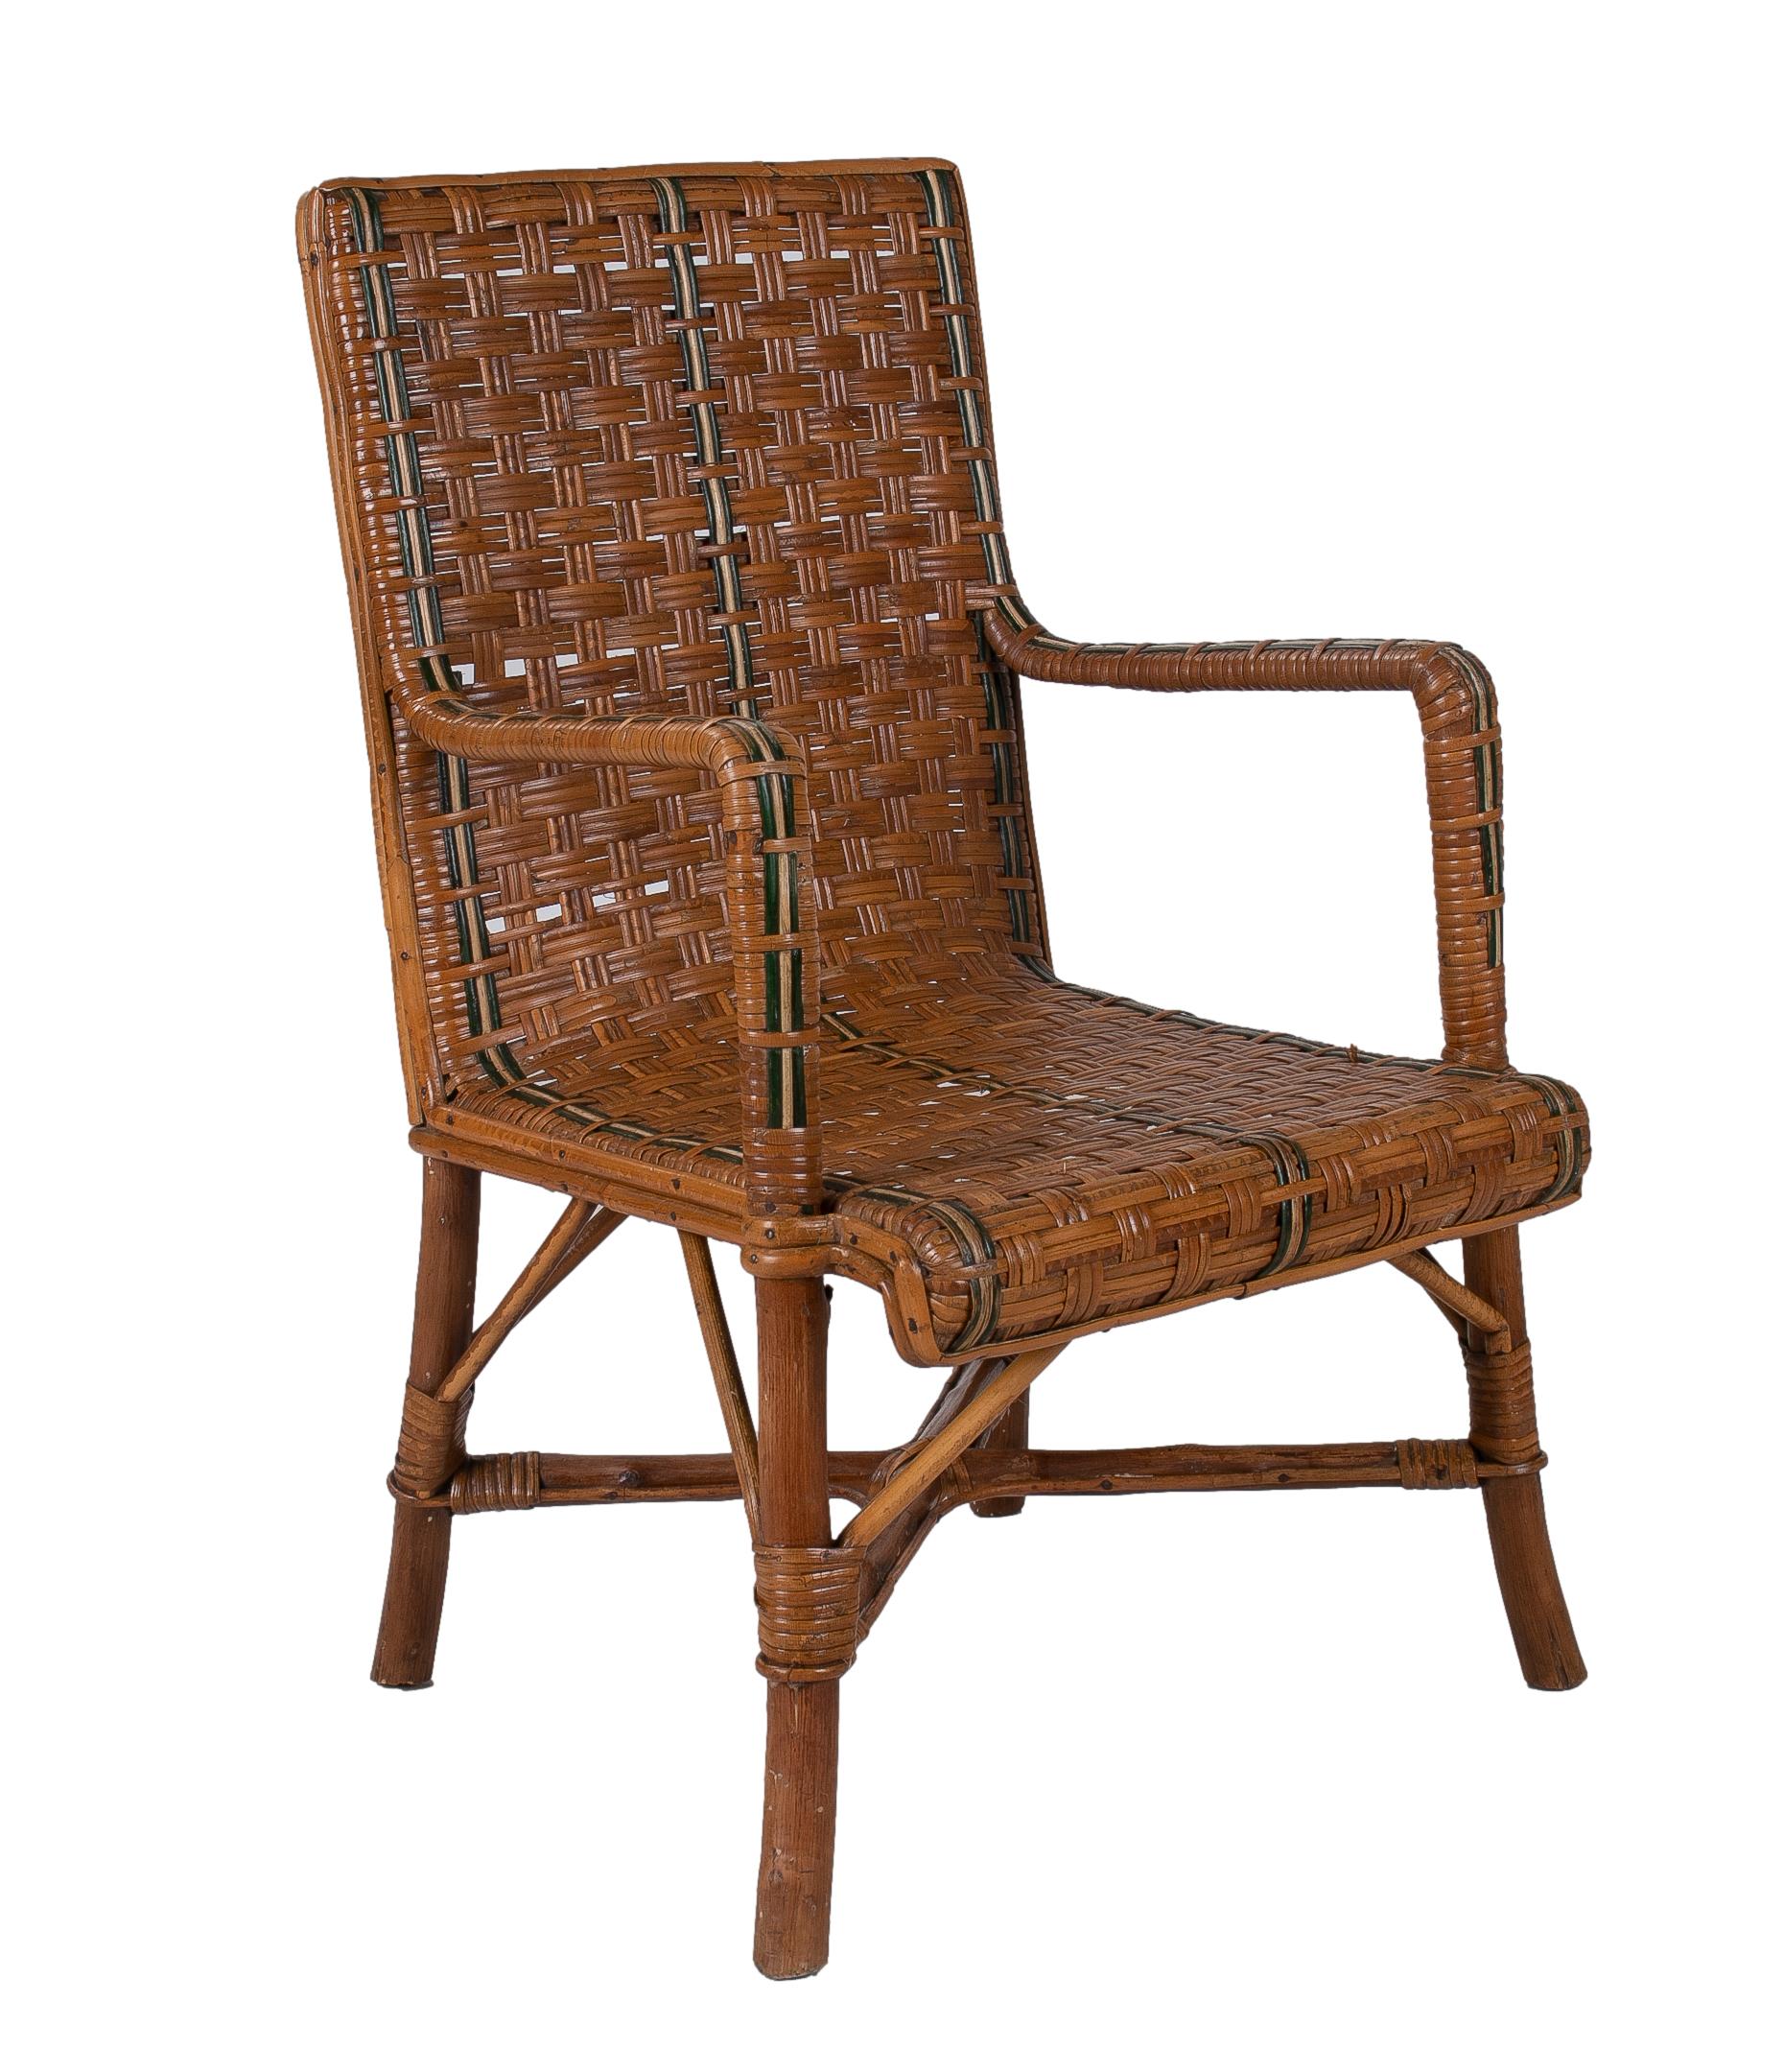 Set of 1950s Spanish Children's Size Lace Wicker & Bamboo Chair w/ Table 6